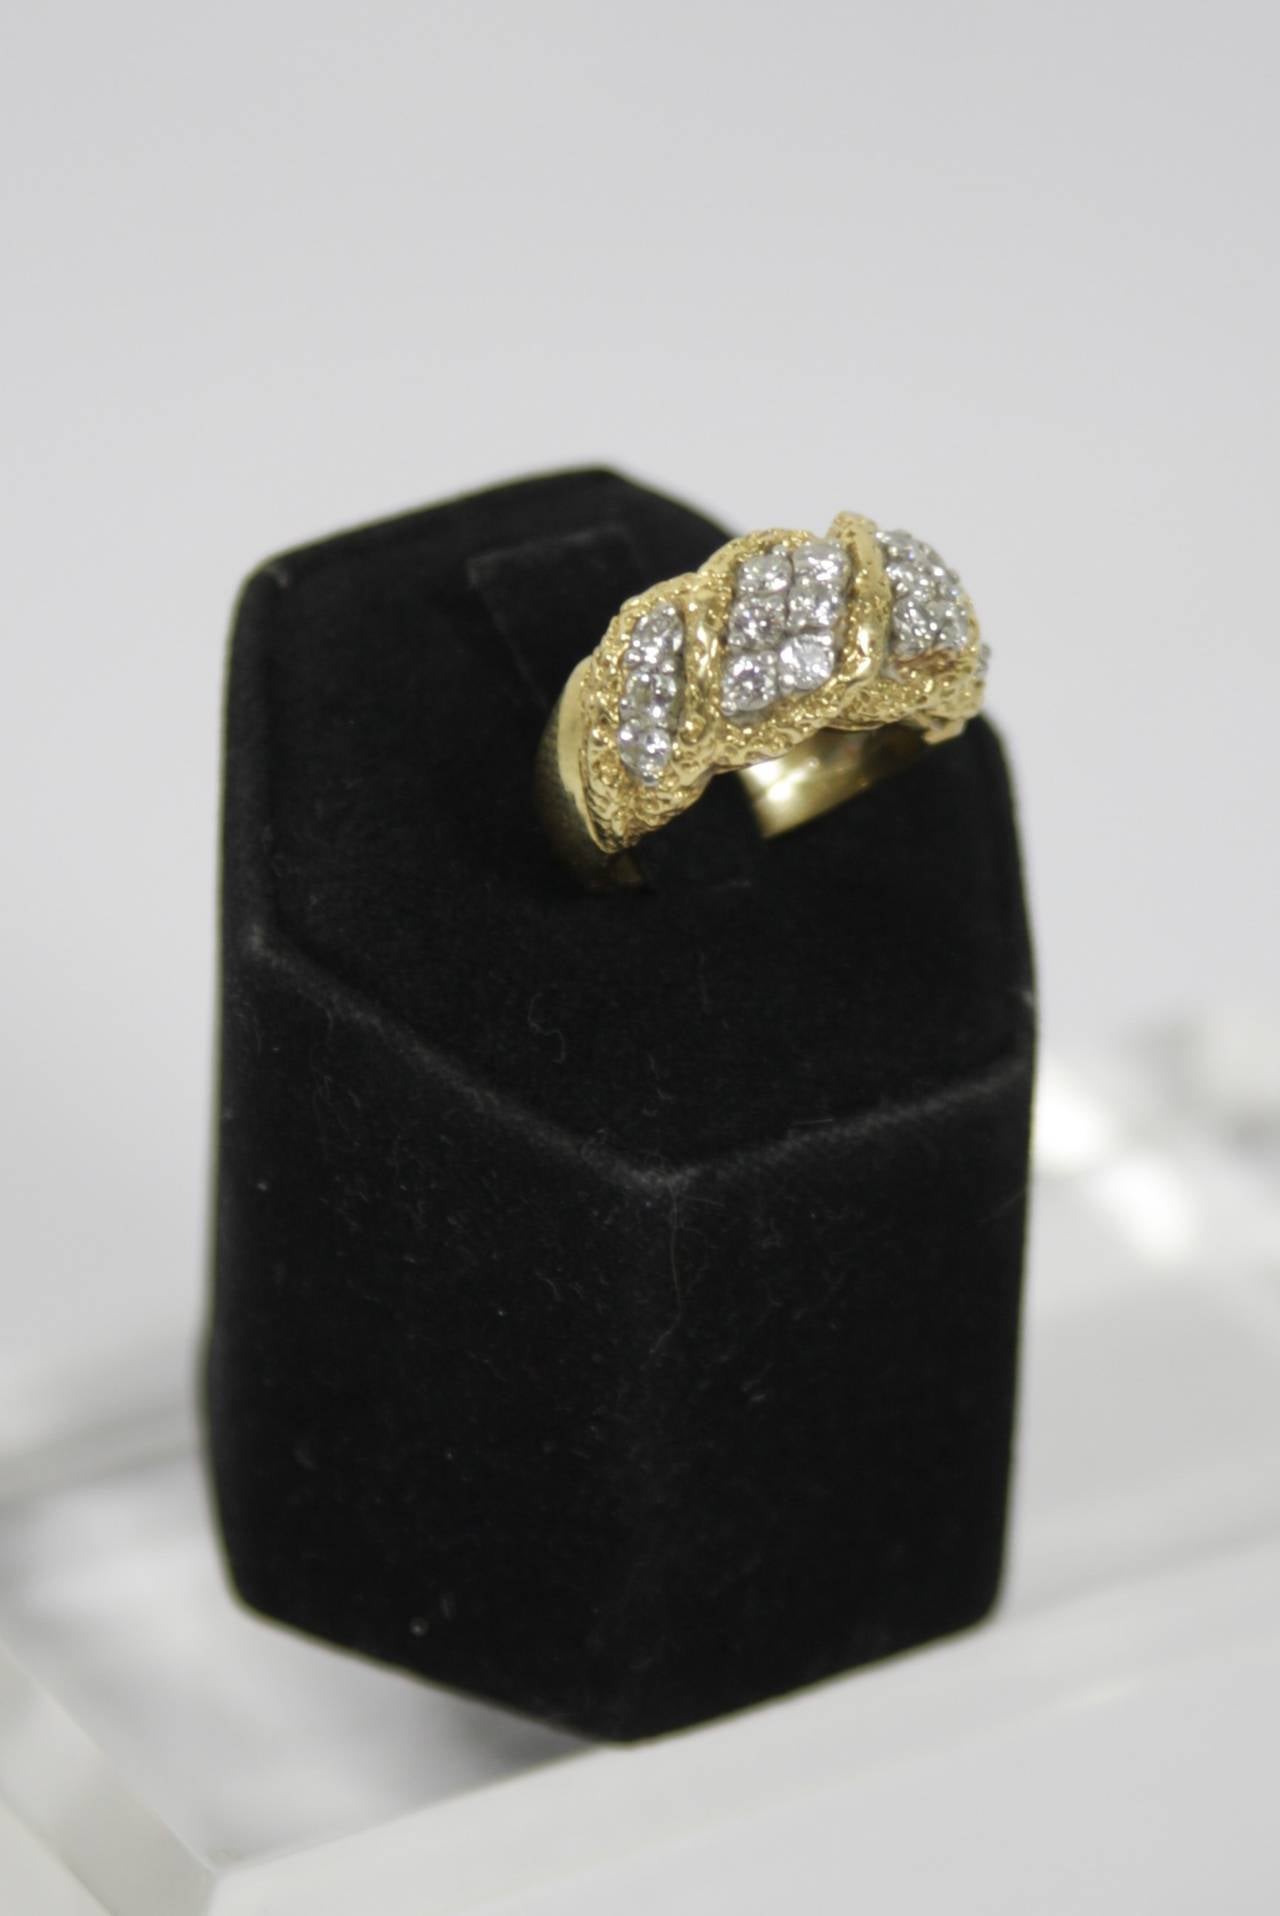 The ring is composed of a textured 18KT yellow gold and features brilliant cut diamonds. Approximately a size 5, can be sized. 

Specs:
18 KT Yellow Gold
Diamonds: 18 brilliant cut diamonds  with an approximate total weight of 1.00 carats
Gold: